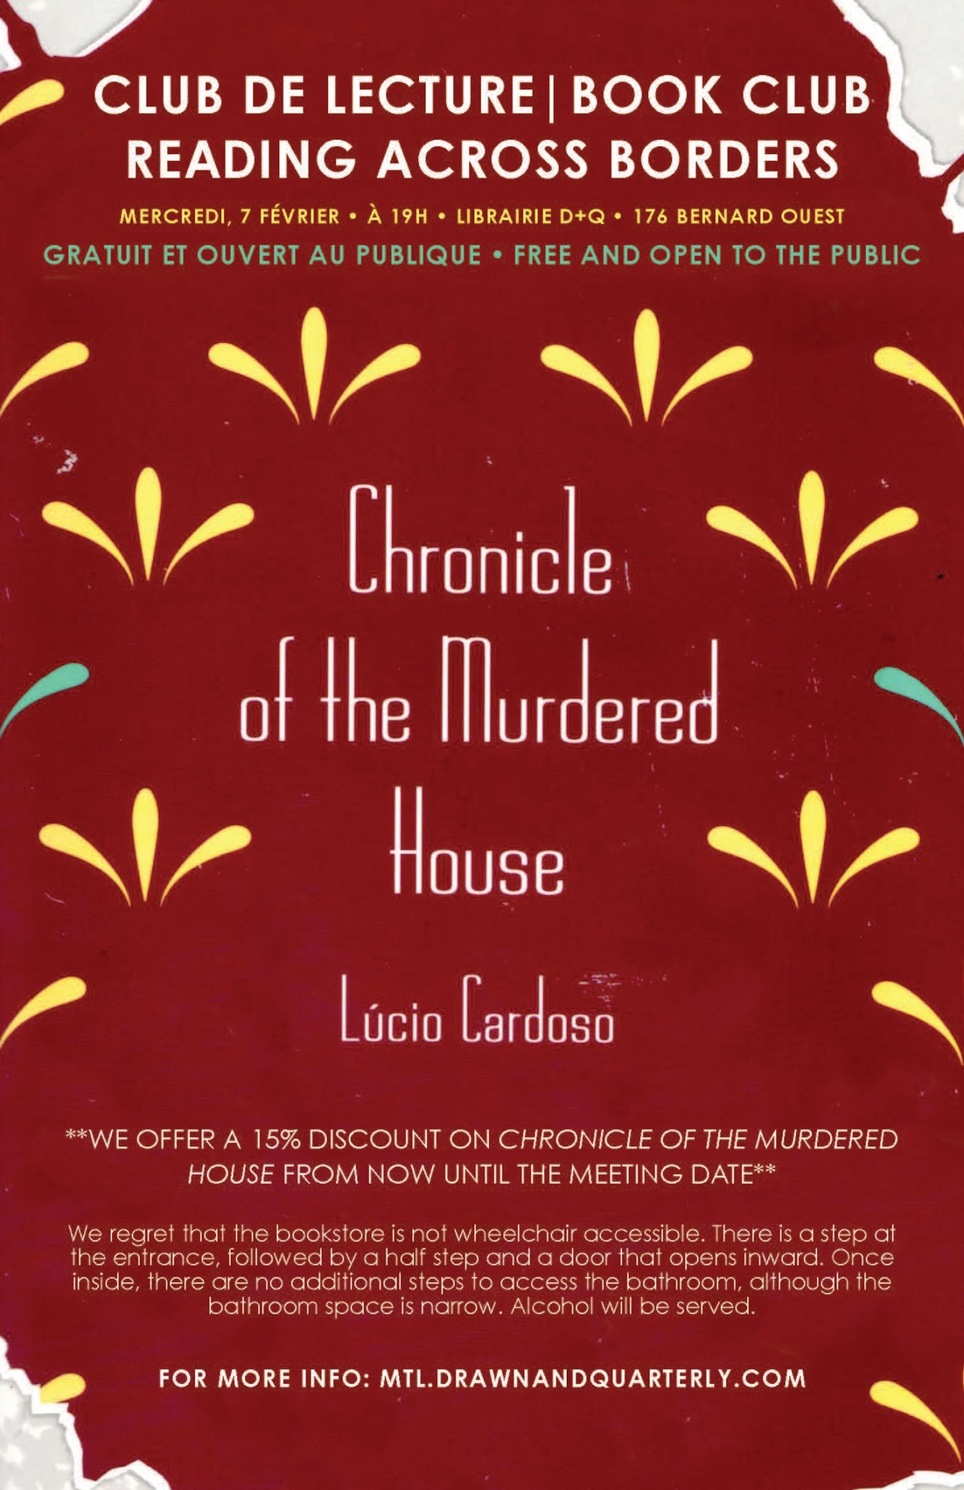 Reading Across Boarders Book Club: Chronicle of the Murdered House by Lúcio Cardoso